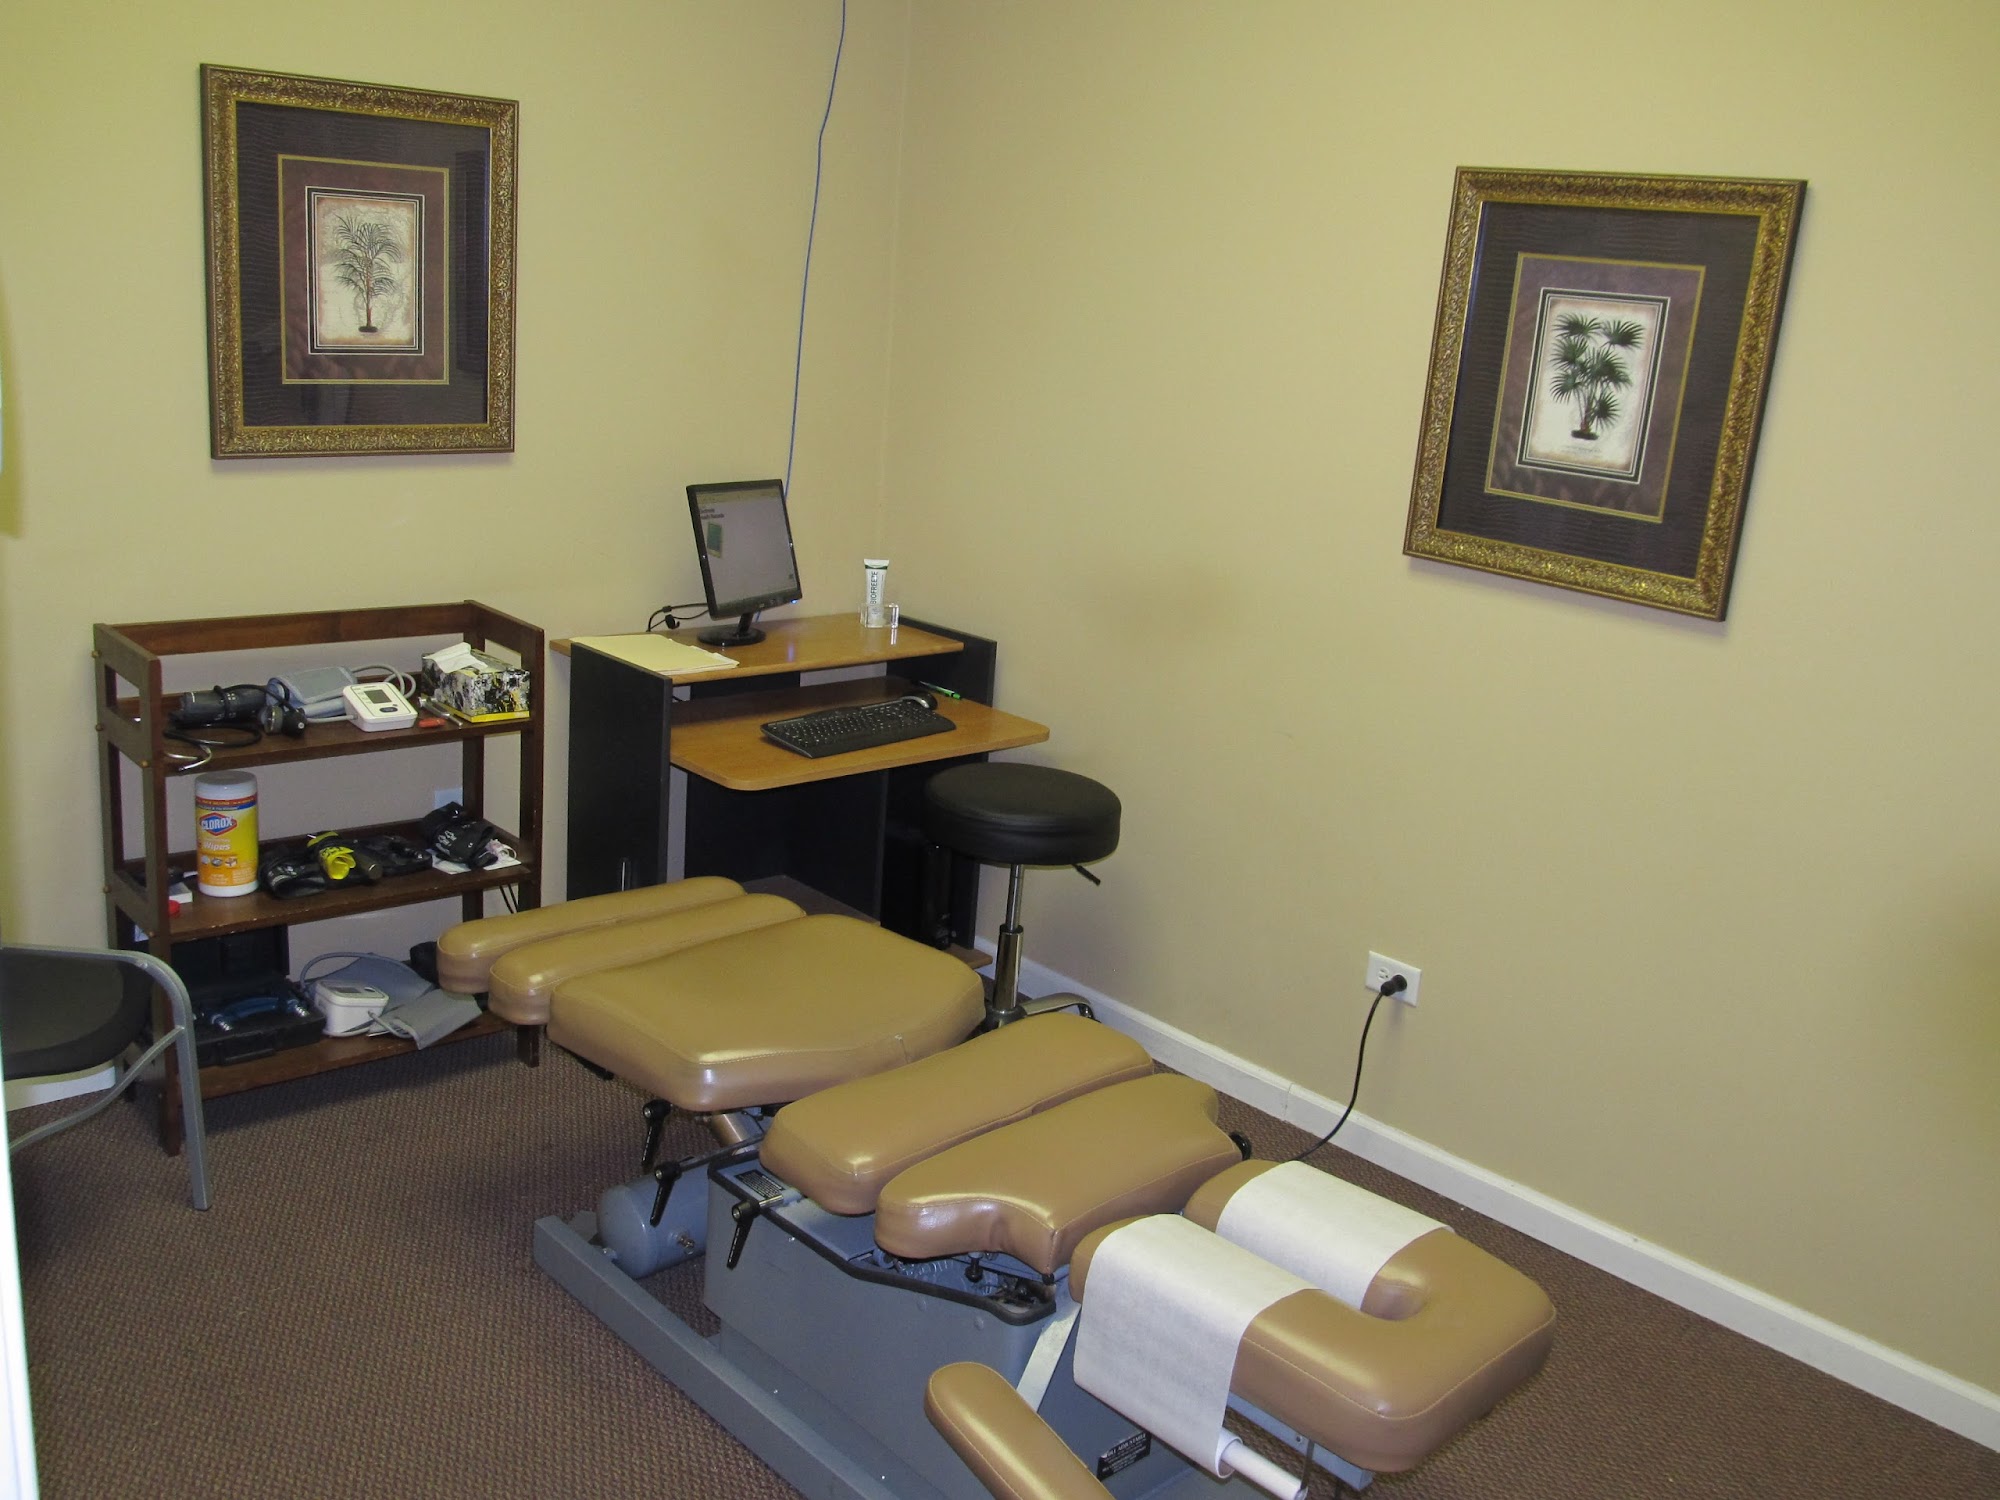 Active Care Chiropractic